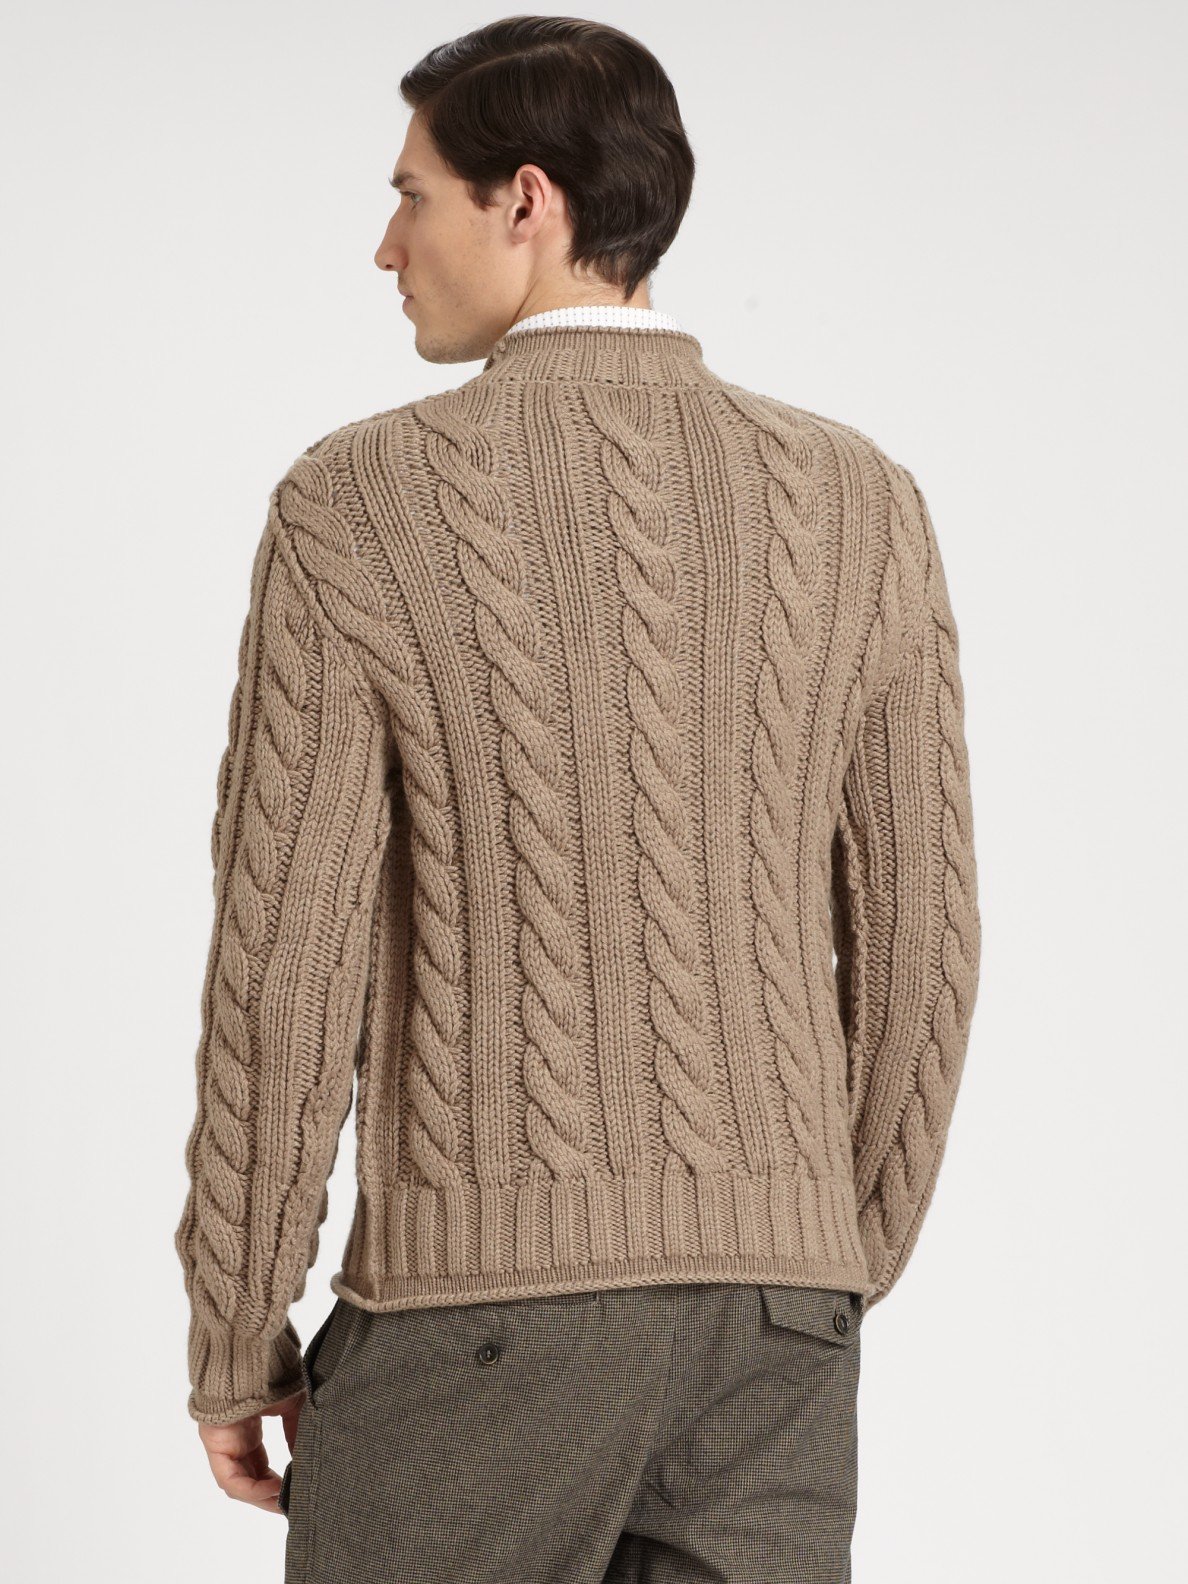 Lyst - Dolce & gabbana Chunky Cable Knit Sweater in Natural for Men